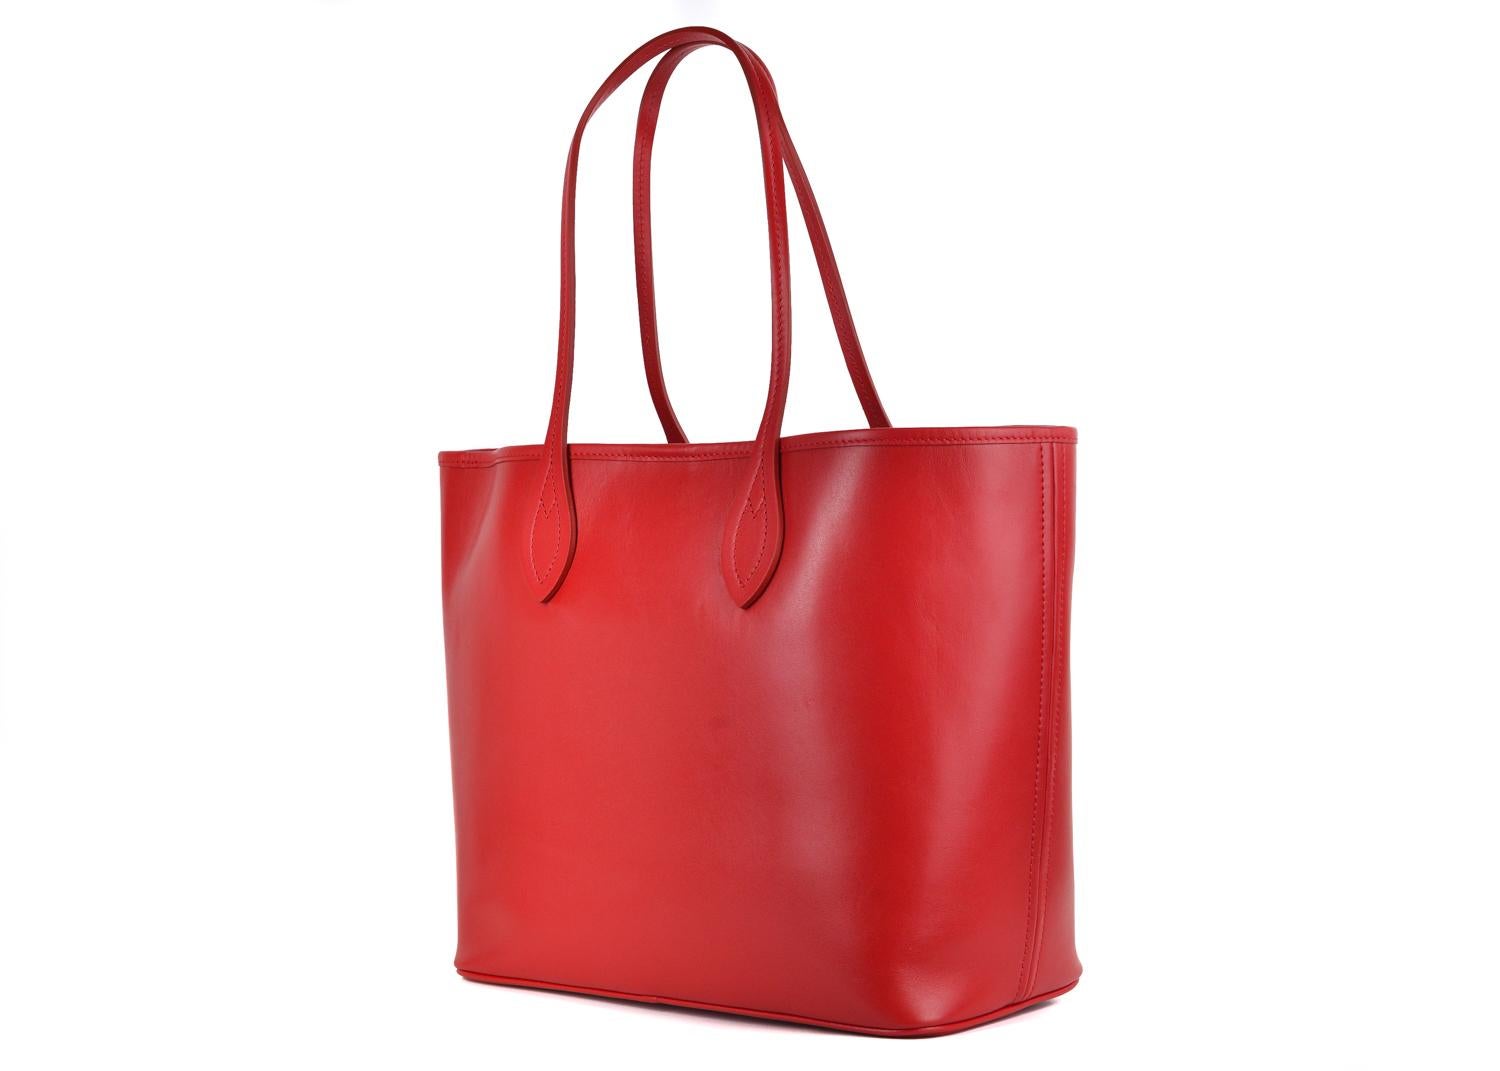 Roberto Cavalli red leather shopping tote bag. This tote bag features a grained leather finish in a beautiful Red color tone with contrasting gold tone hardware. This shopping bag is a great accessory for an everyday wear to store all your daily